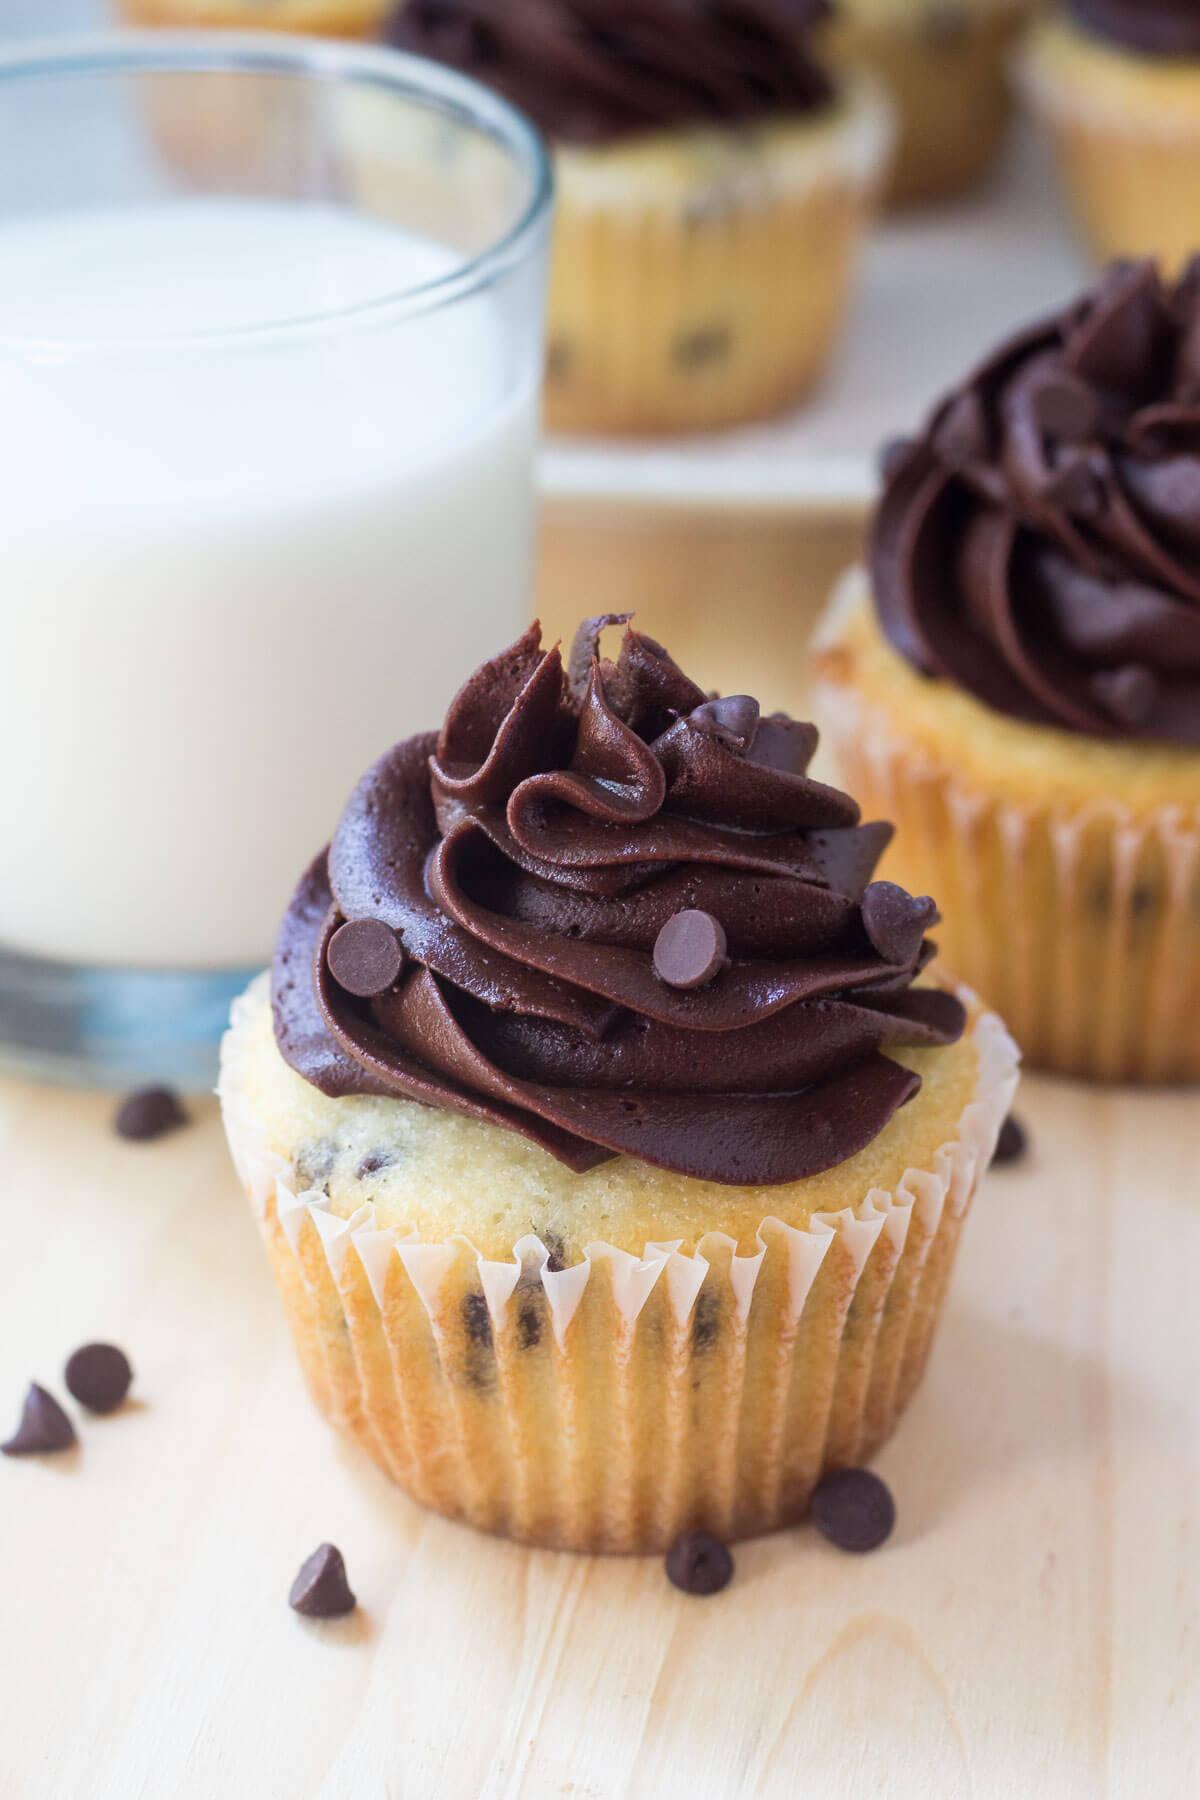 Chocolate Chip Cupcakes with Chocolate Frosting - Oh Sweet Basil